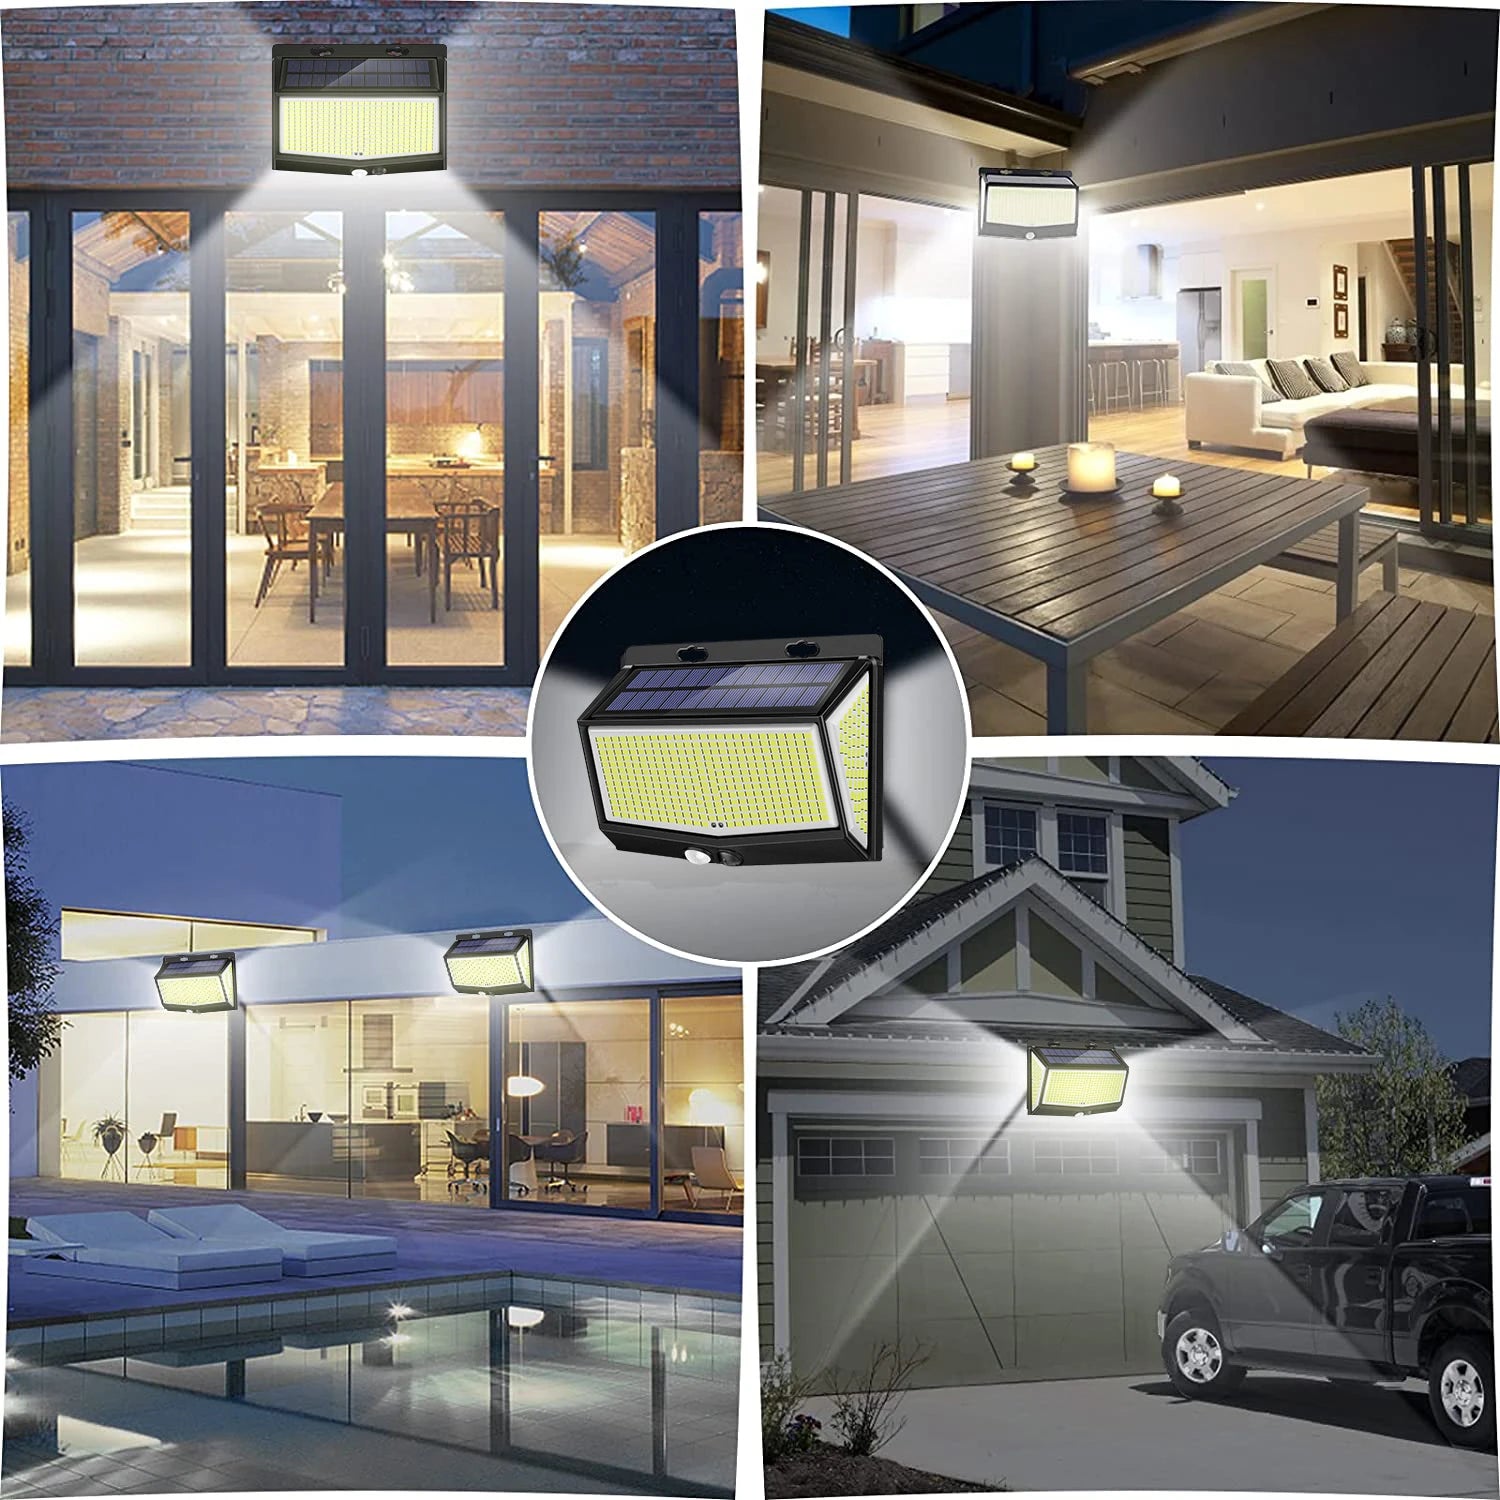 468 LED Solar Light, Charge lamp upon arrival due to storage/transport limitations, ensuring optimal performance.